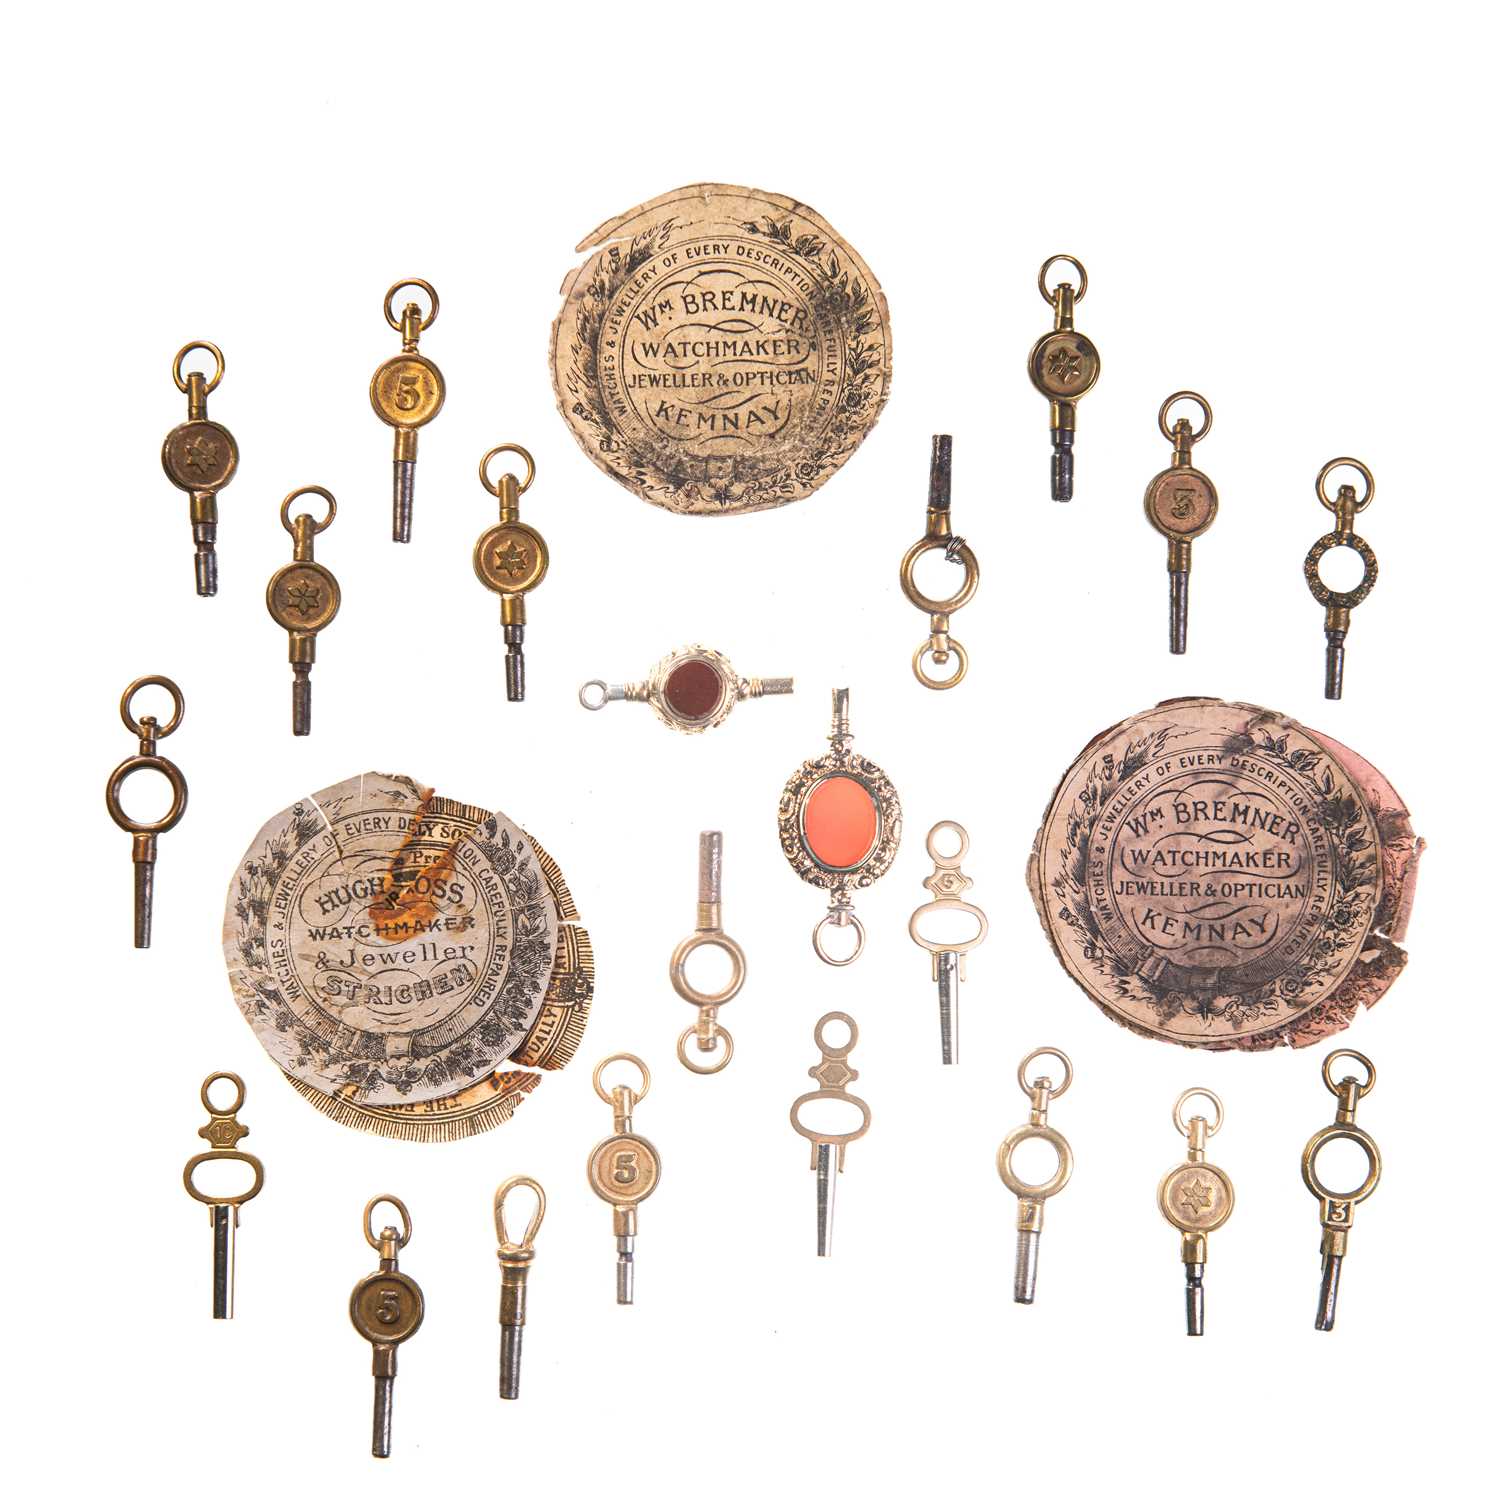 AN ASSORTMENT OF POCKET WATCH KEYS AND PAPERS